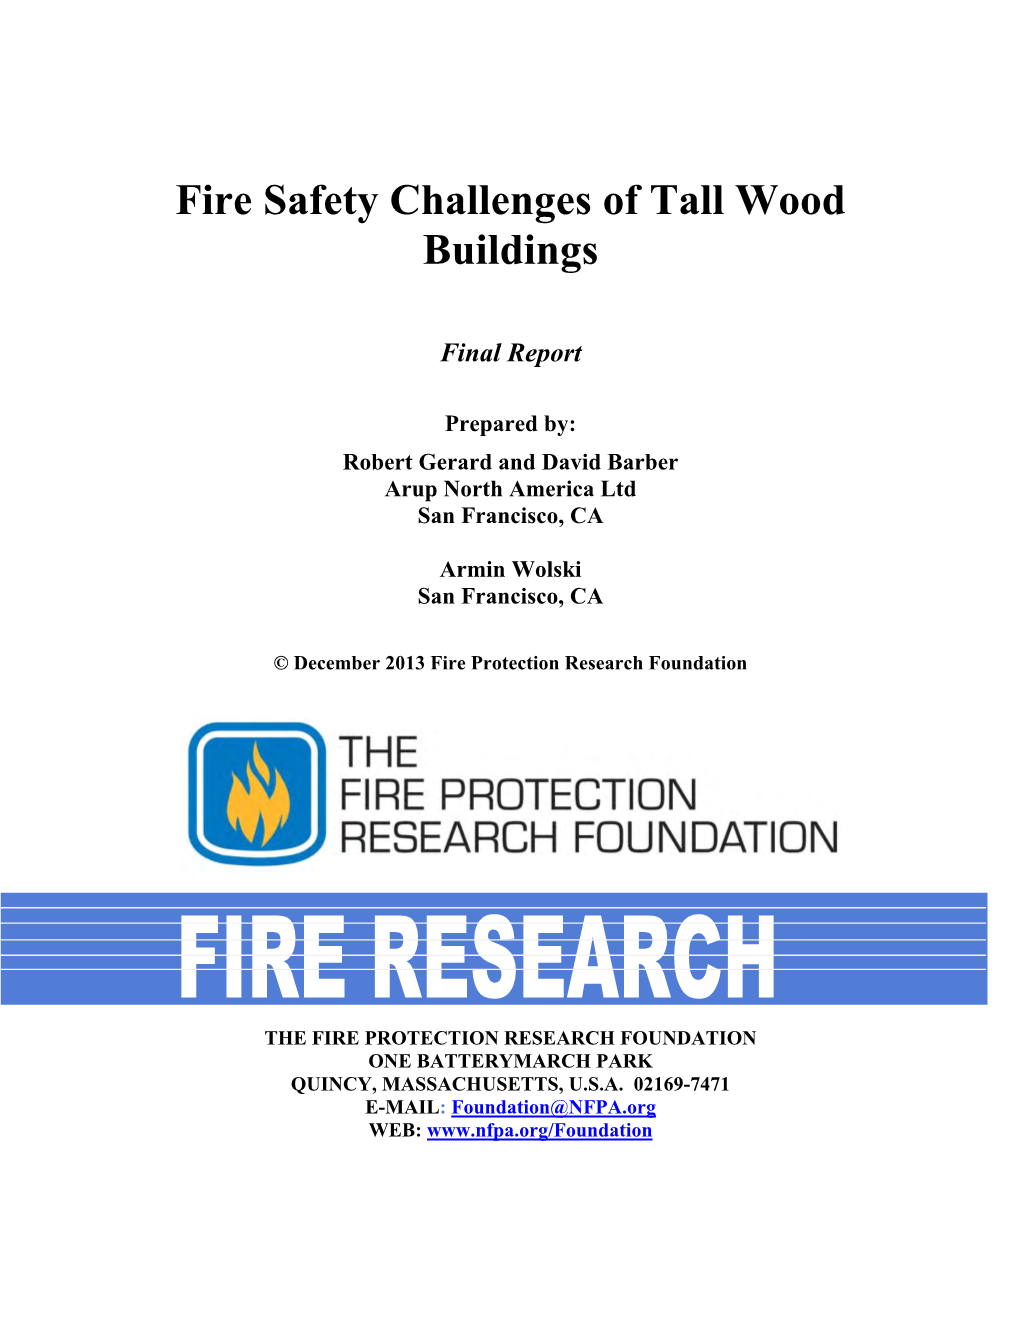 Fire Safety Challenges of Tall Wood Buildings (2013)